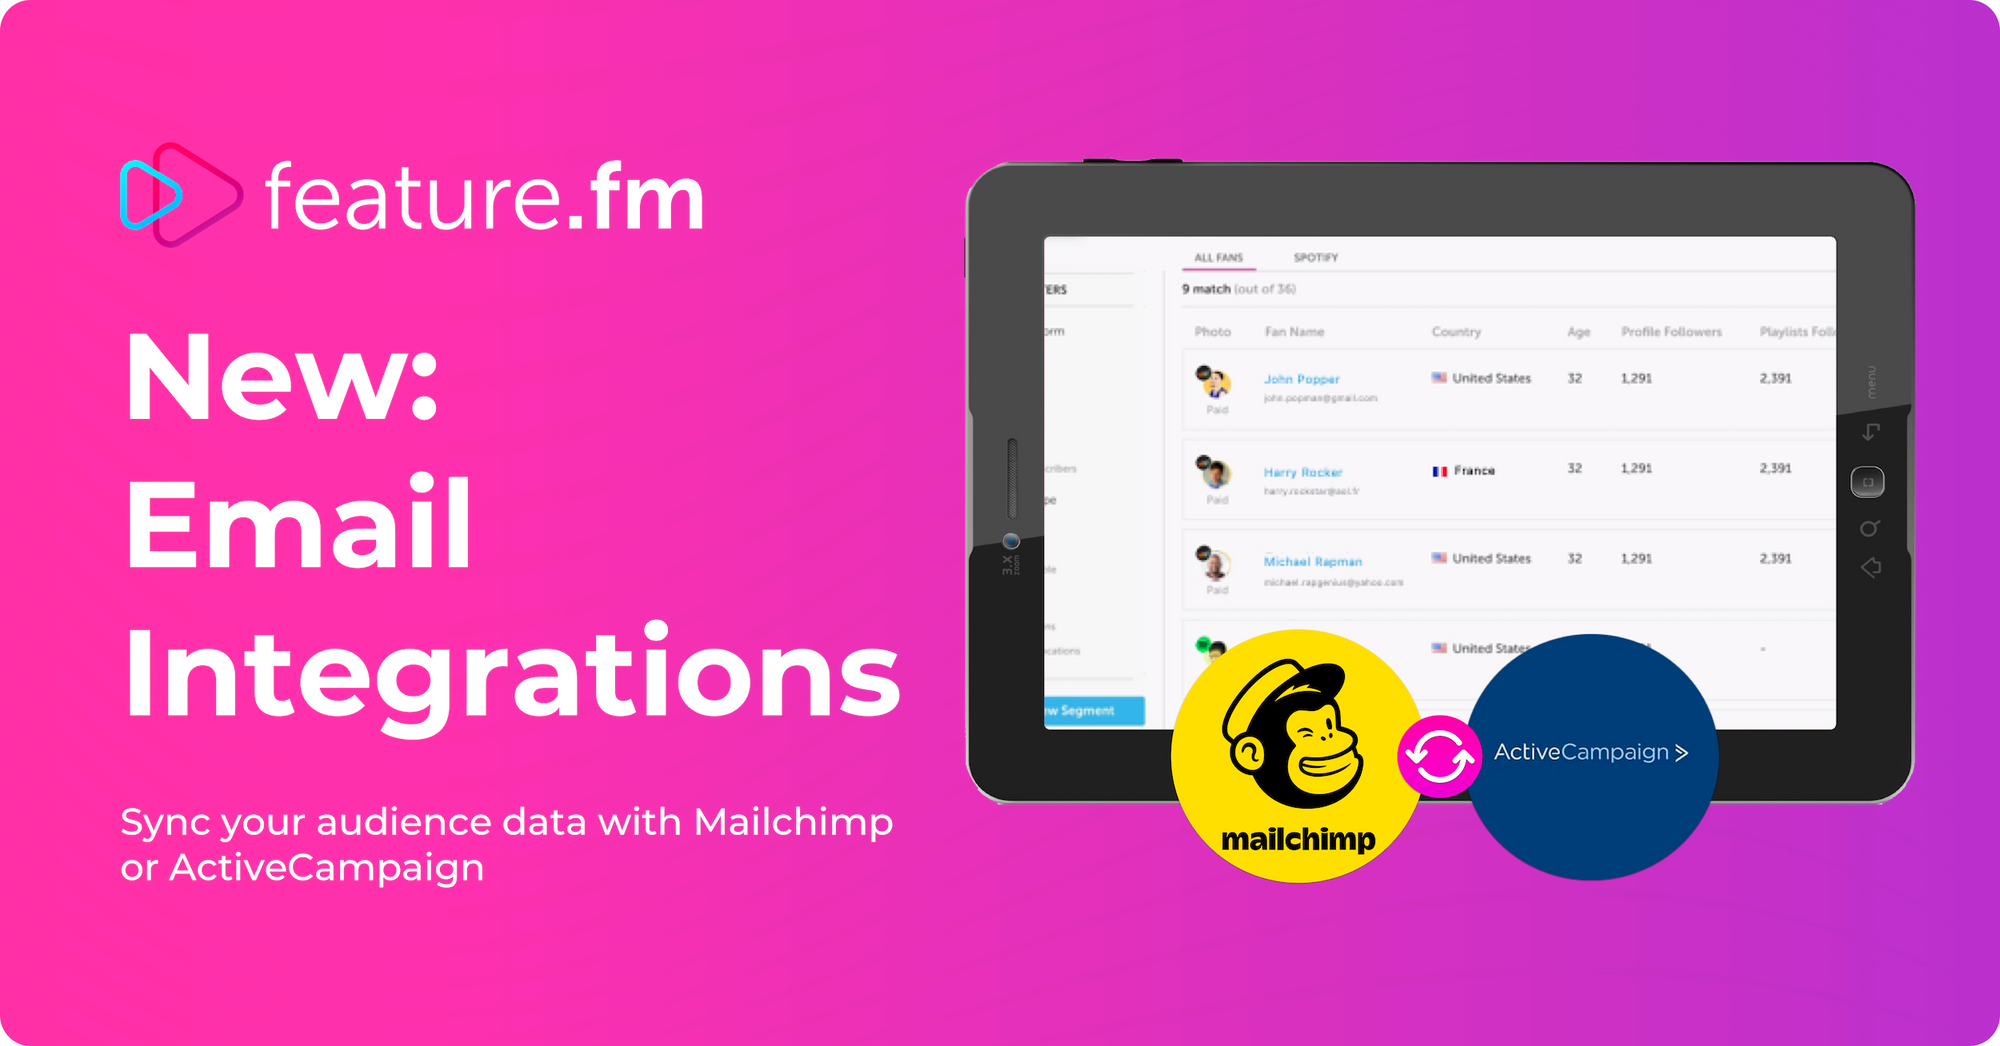 New: Instantly sync new audience data directly to Mailchimp or ActiveCampaign